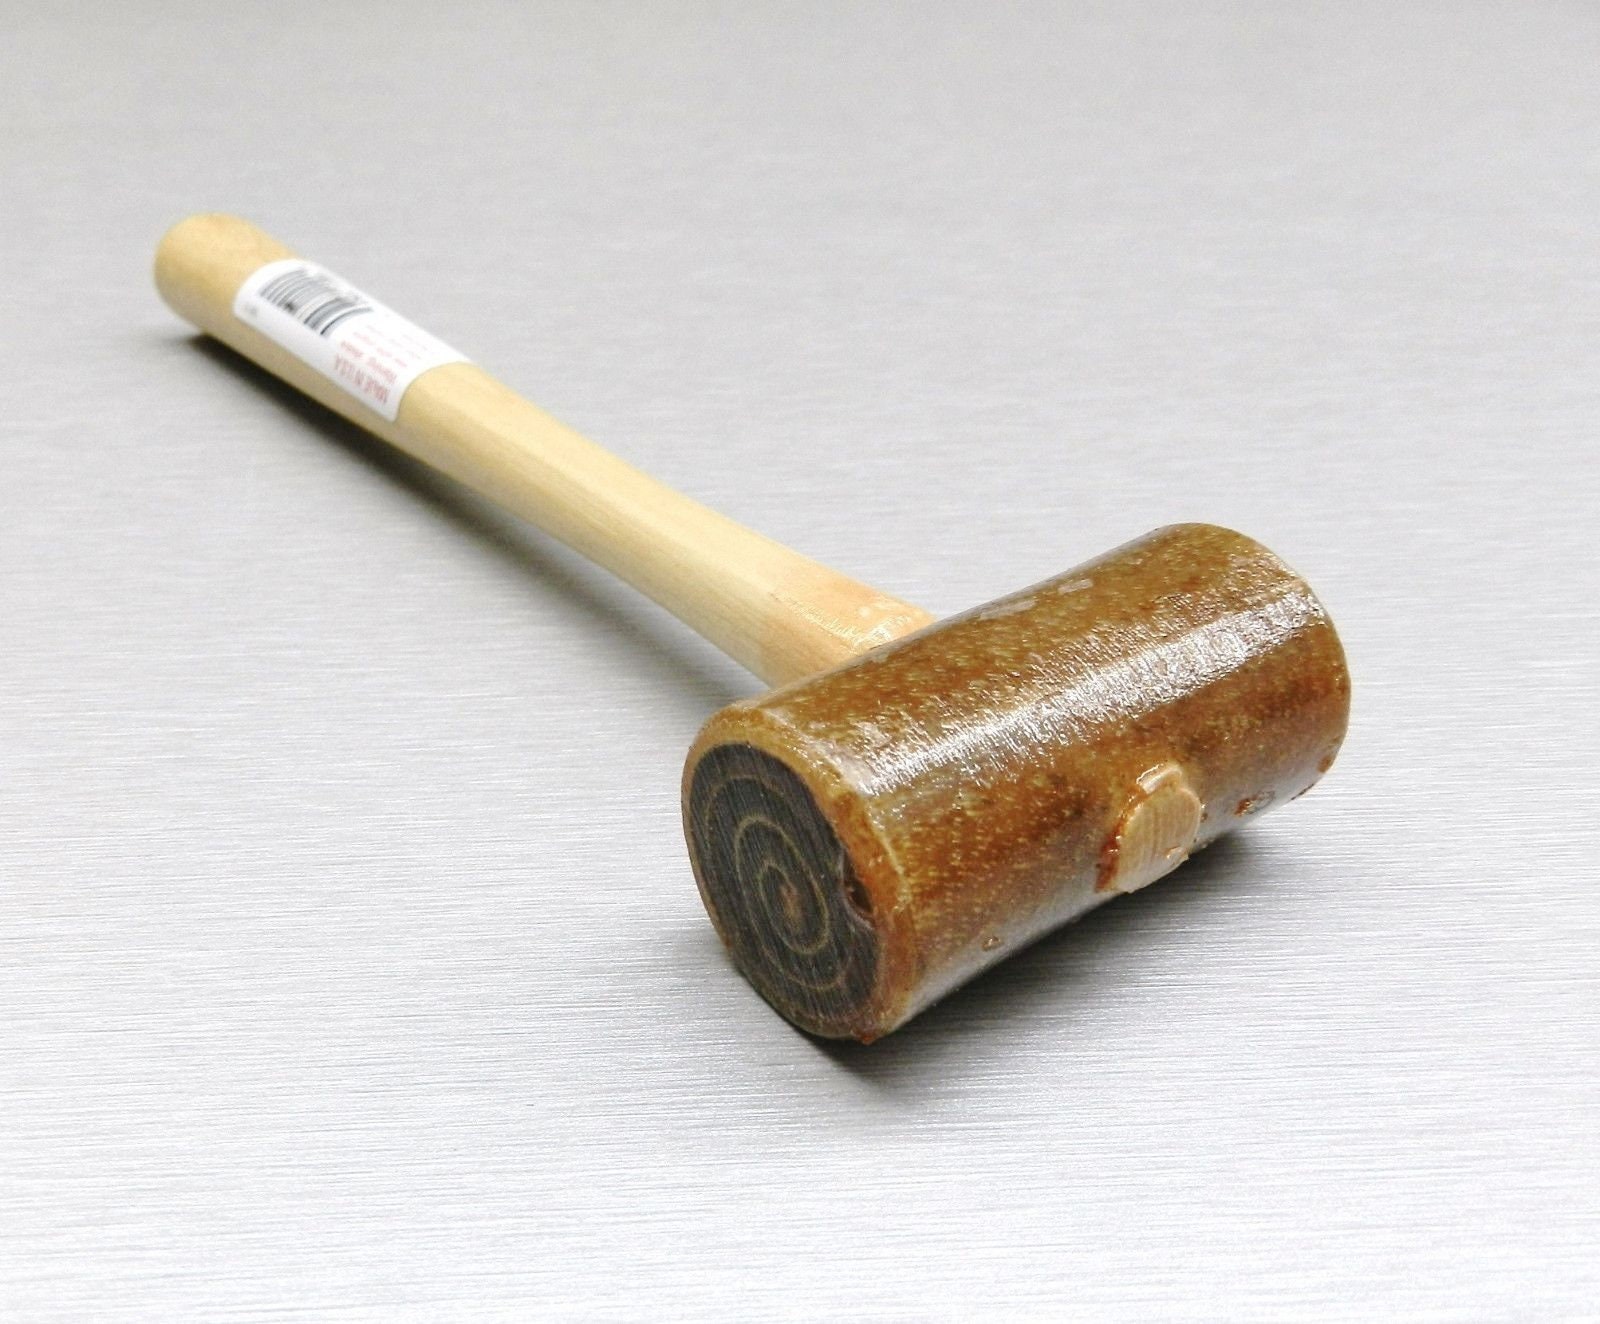 2 Rawhide Leather Mallet 6 oz Extra Soft Non-Coated Natural Rawhide Mallet Hammer Non-Marring Jewelry Making Metal Forming Stamping Leatherwork Tool